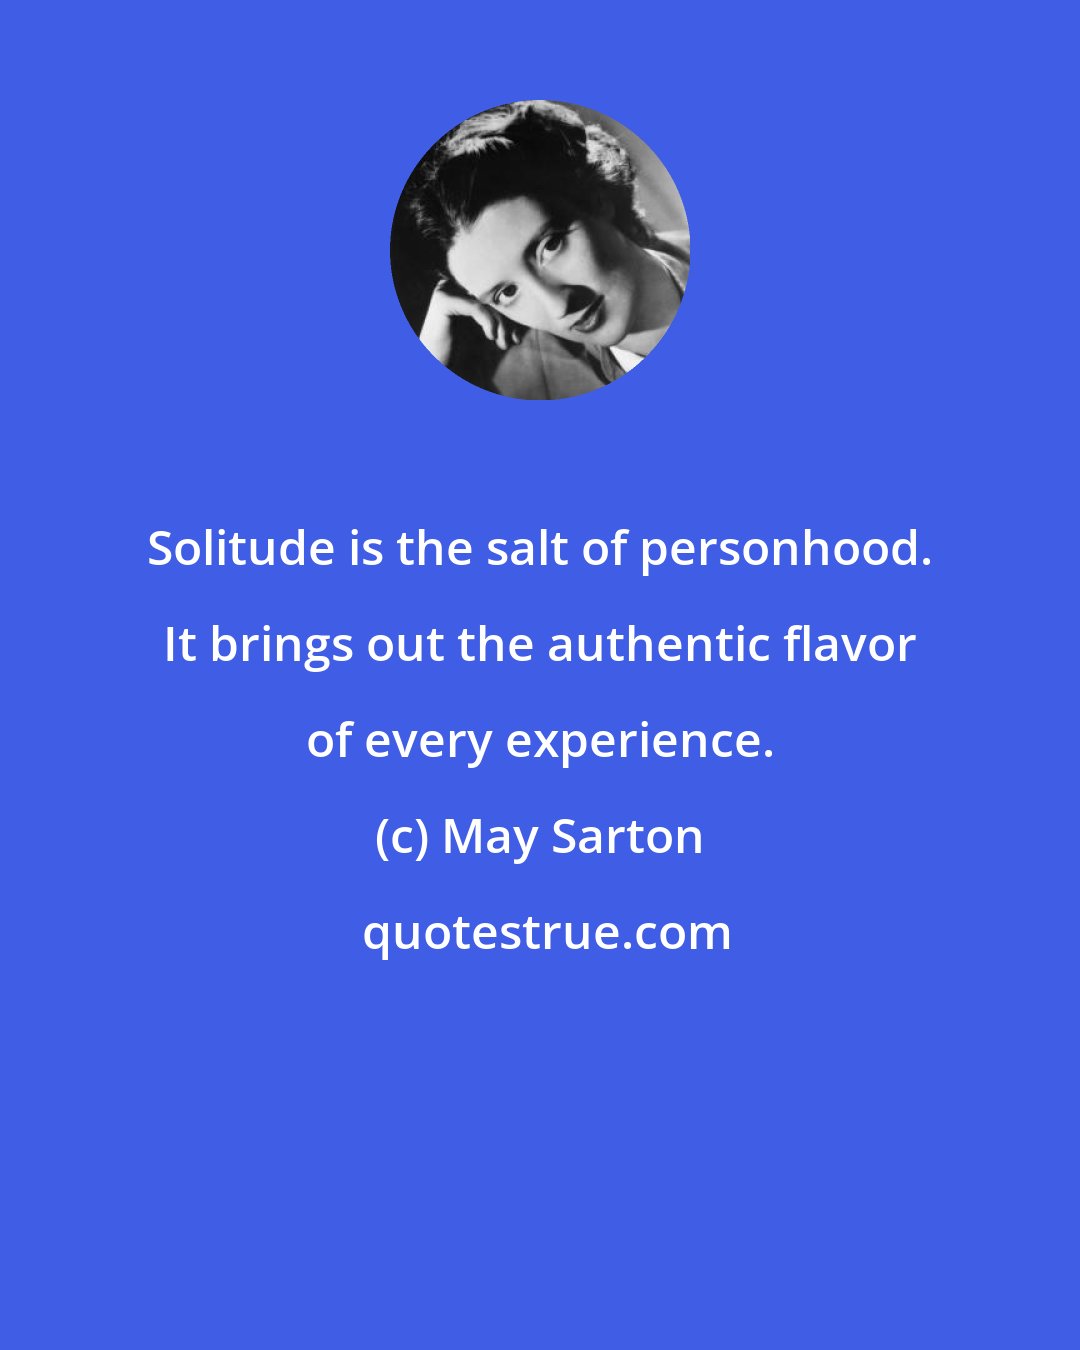 May Sarton: Solitude is the salt of personhood. It brings out the authentic flavor of every experience.